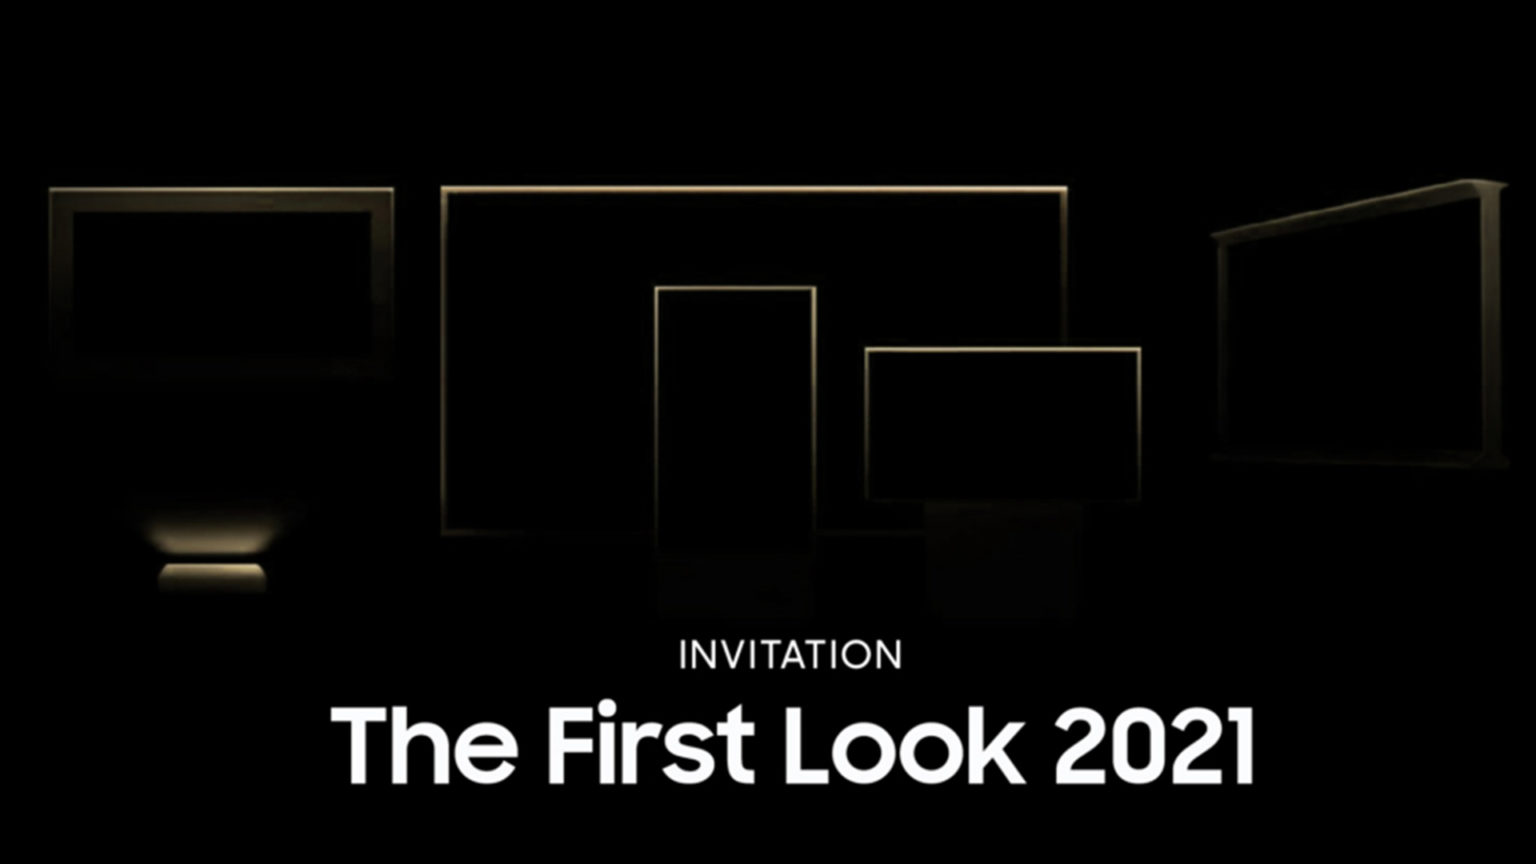 samsung-display-first-look-2021-event-1536×864